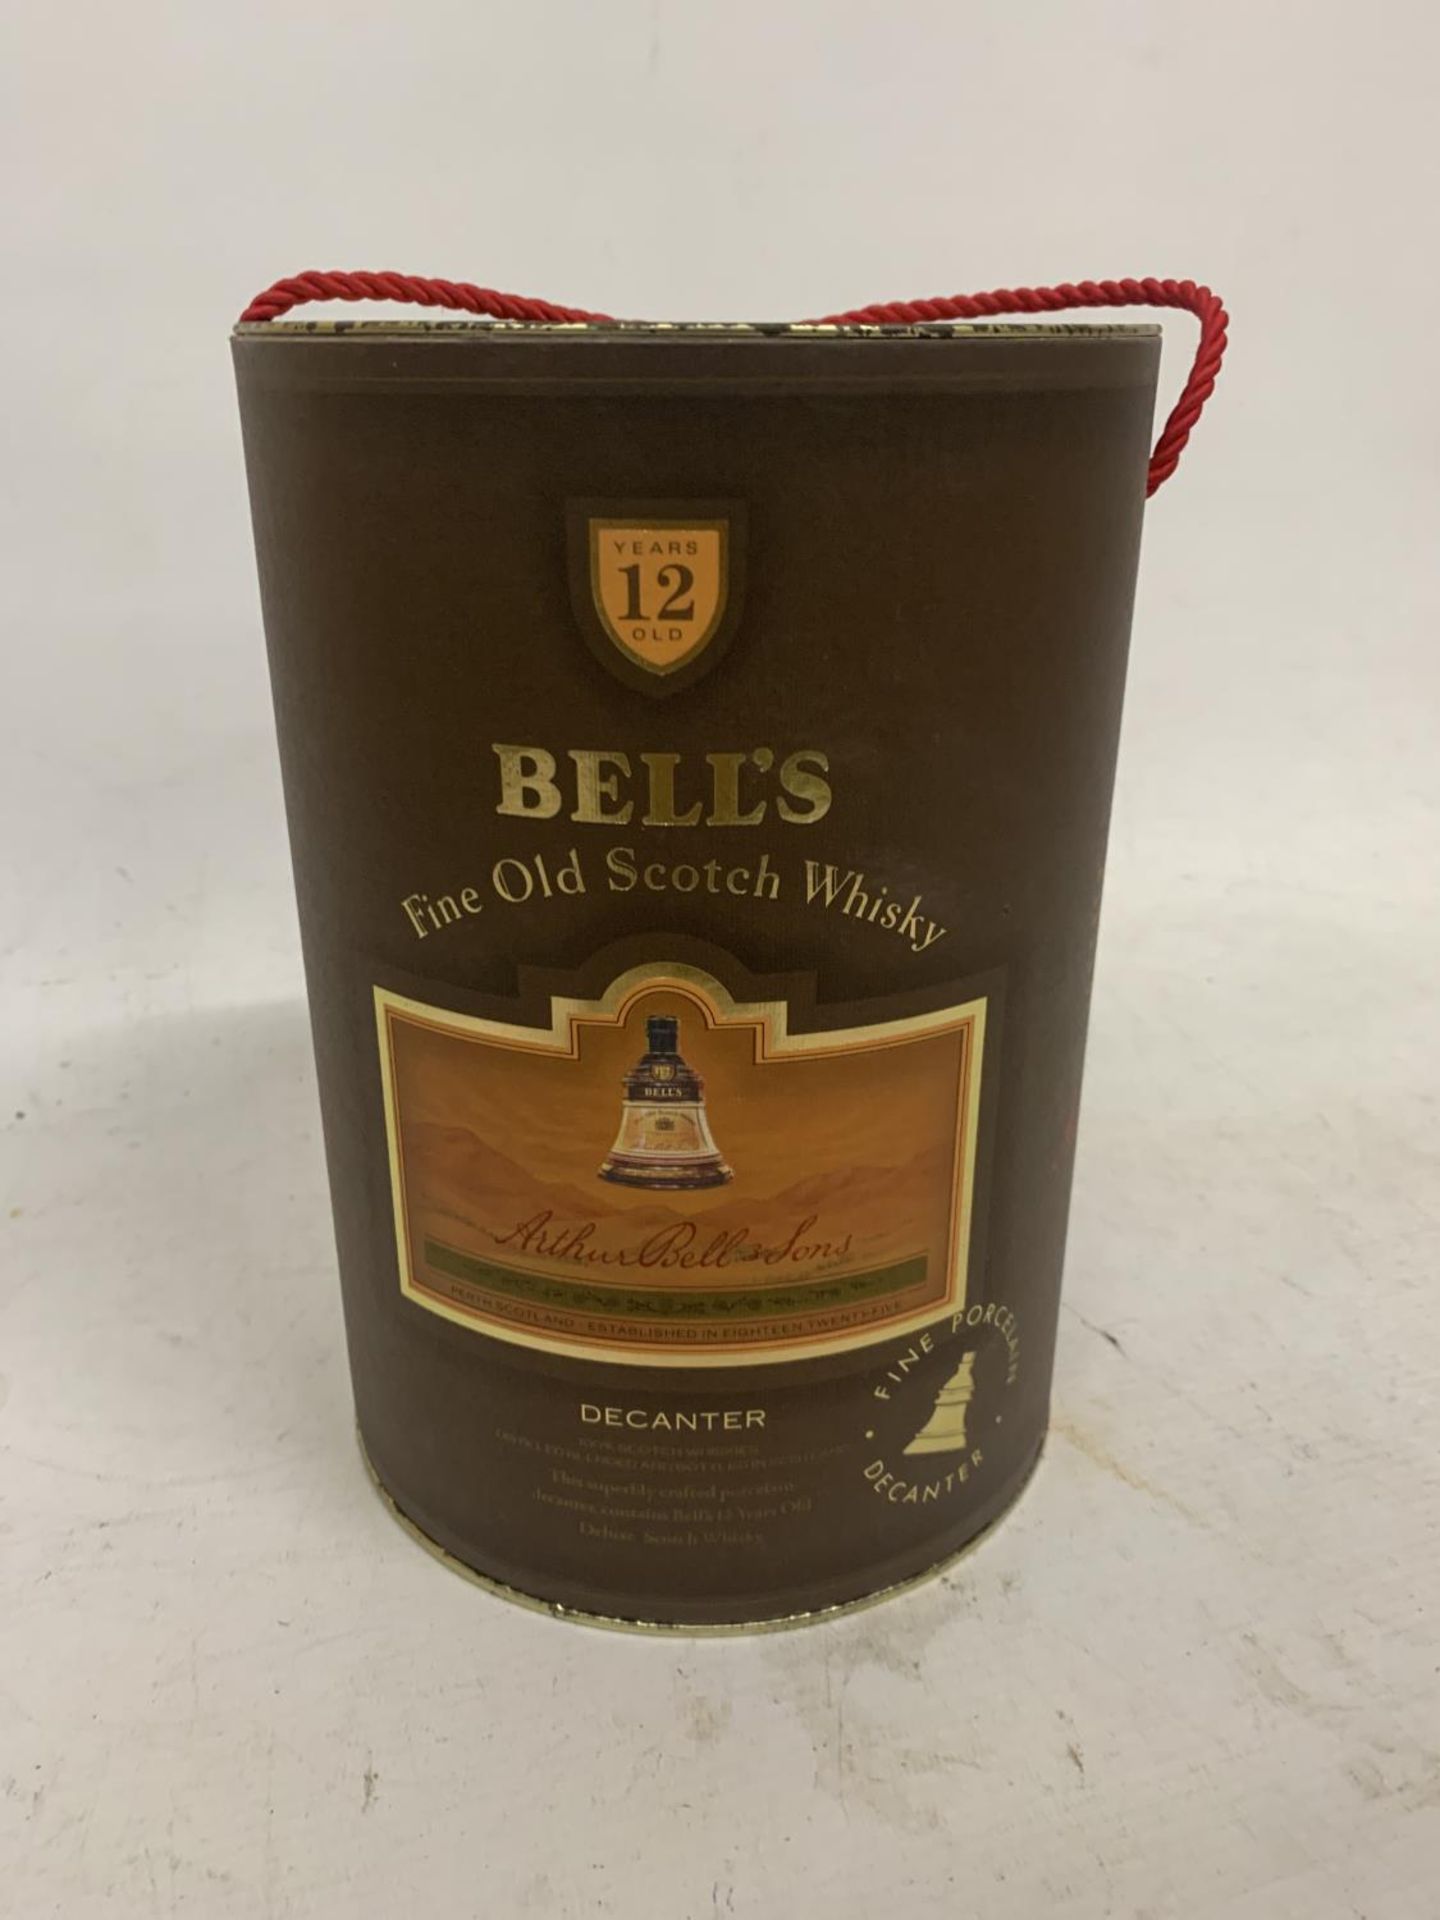 A BOXED 75CL BOTTLE - BELLS 12 YEARS OLD FINE OLD SCOTCH WHISKY DECANTER